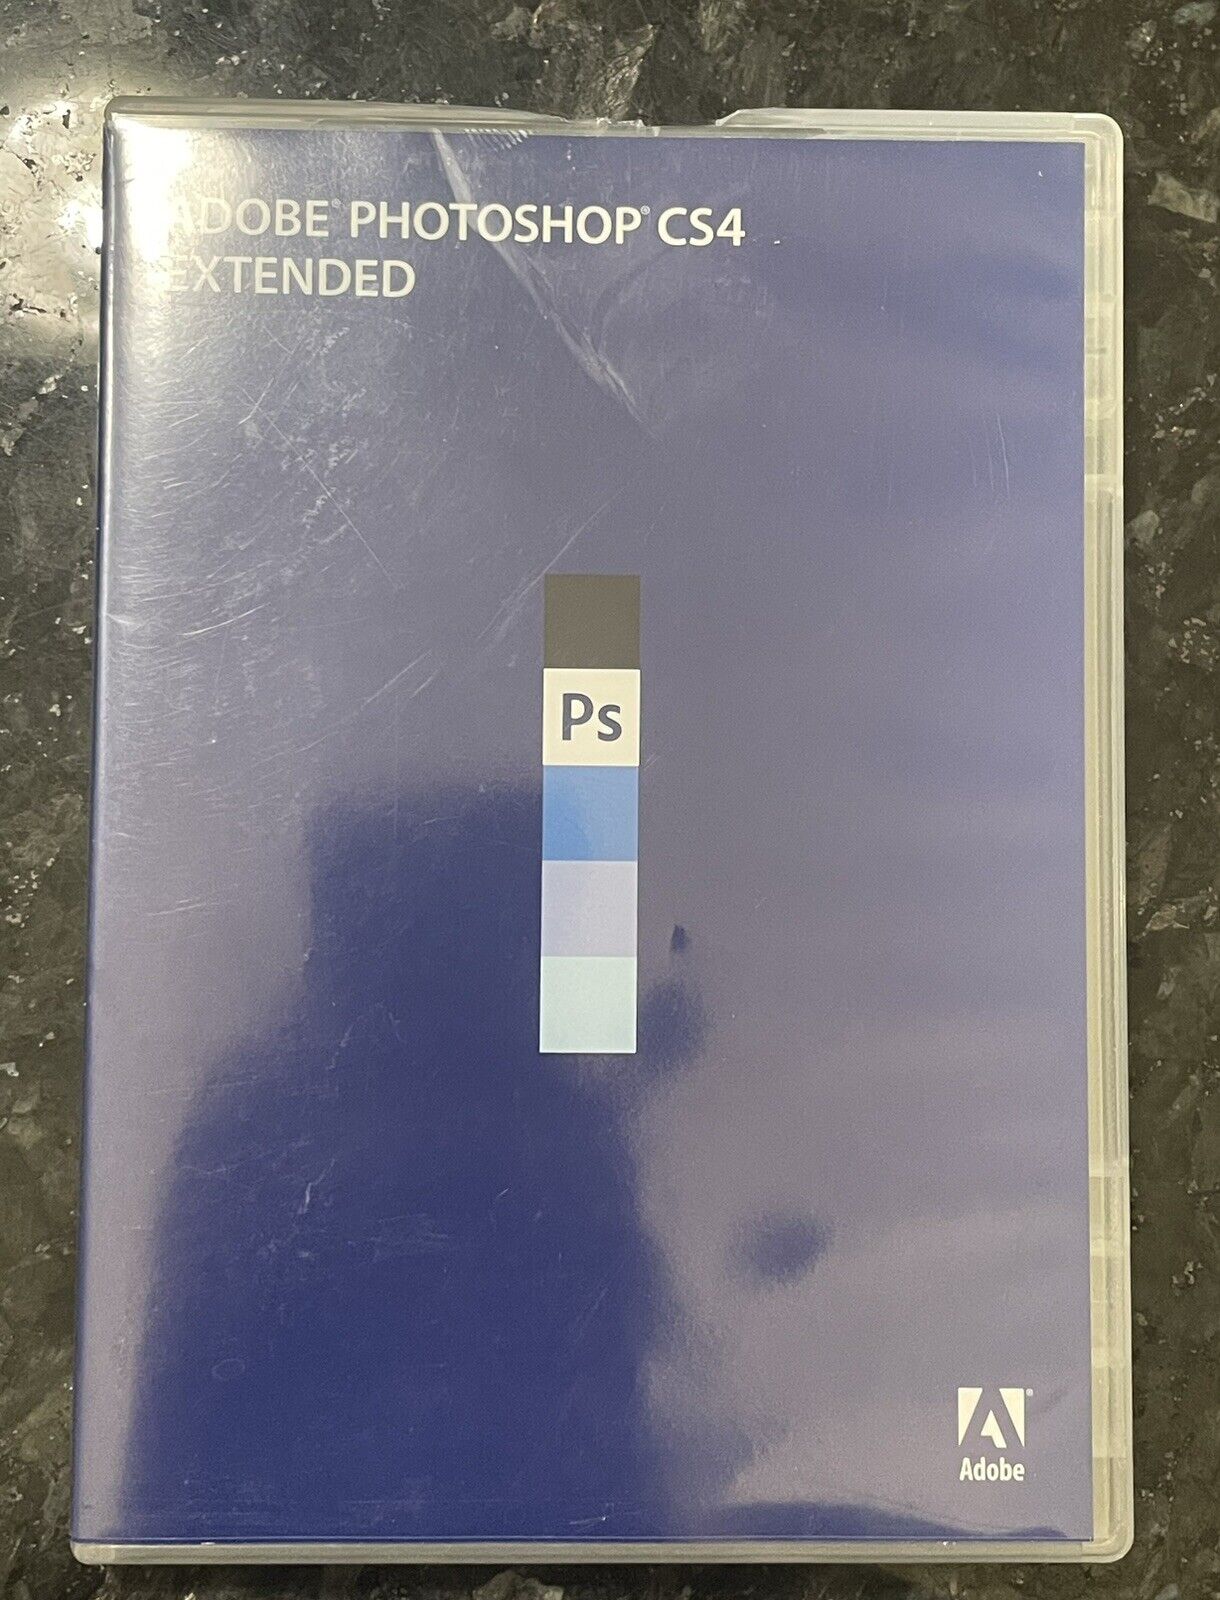 Adobe Photoshop CS4 Extended for Windows Full Retail version DVD w/Serial Number